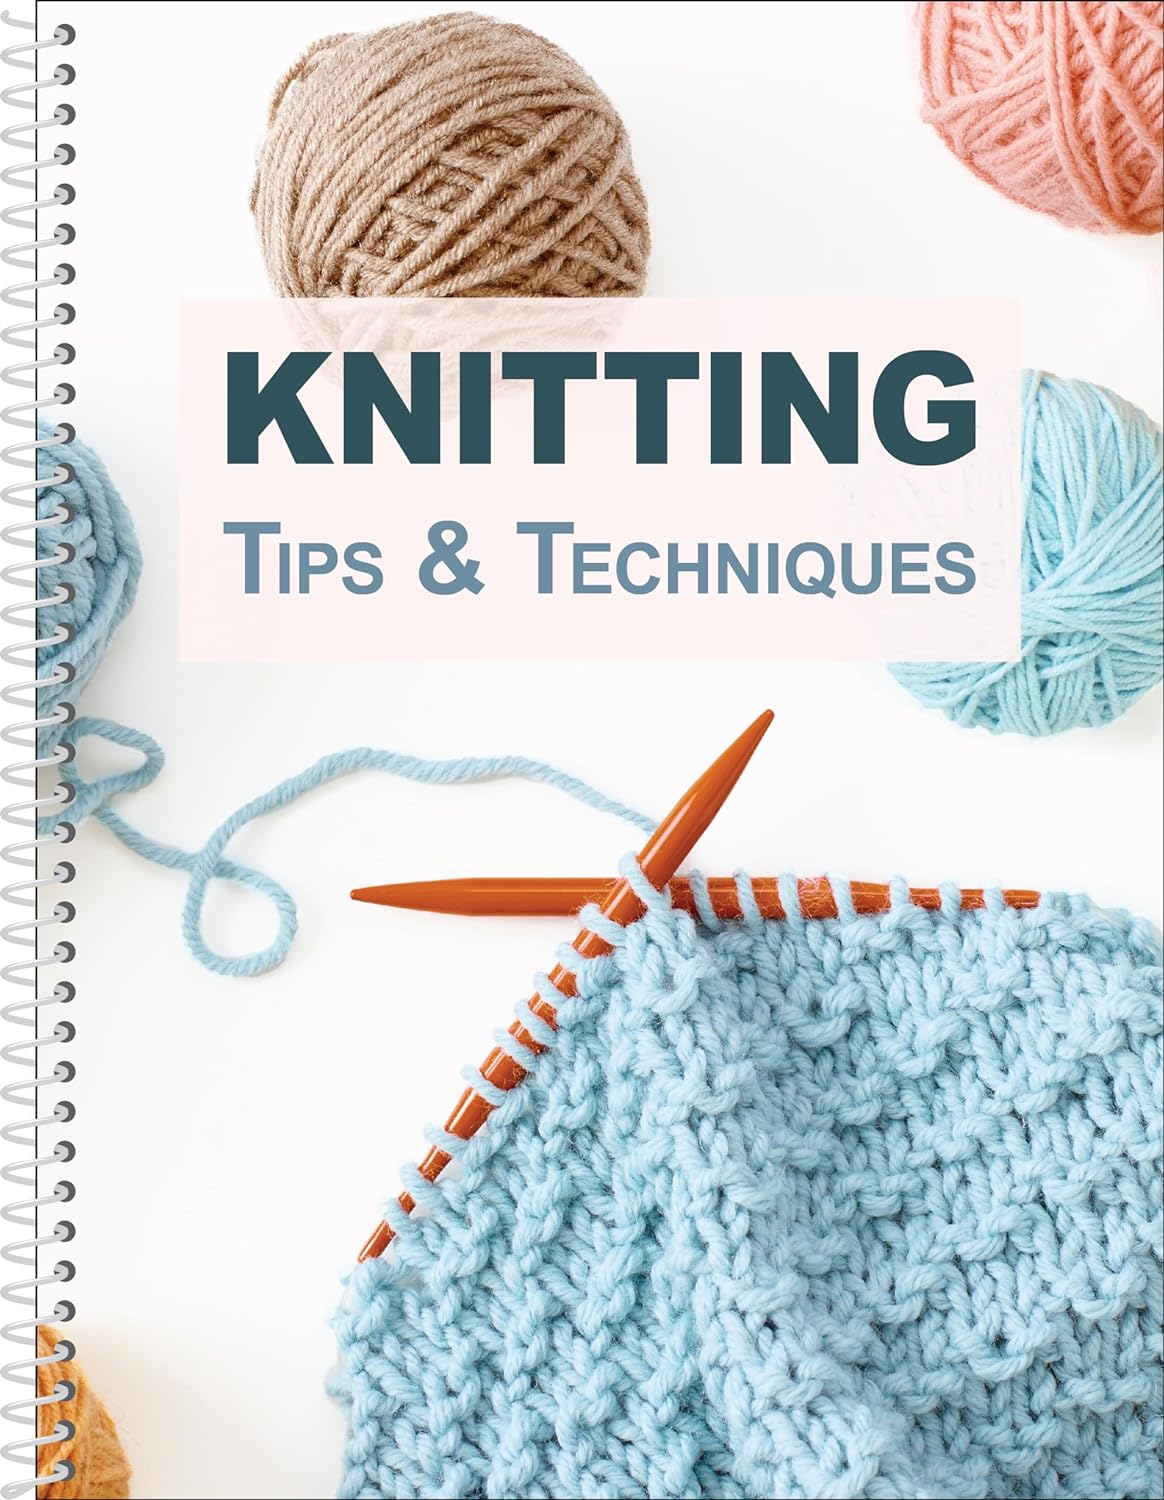 Knitting Tips and Techniques